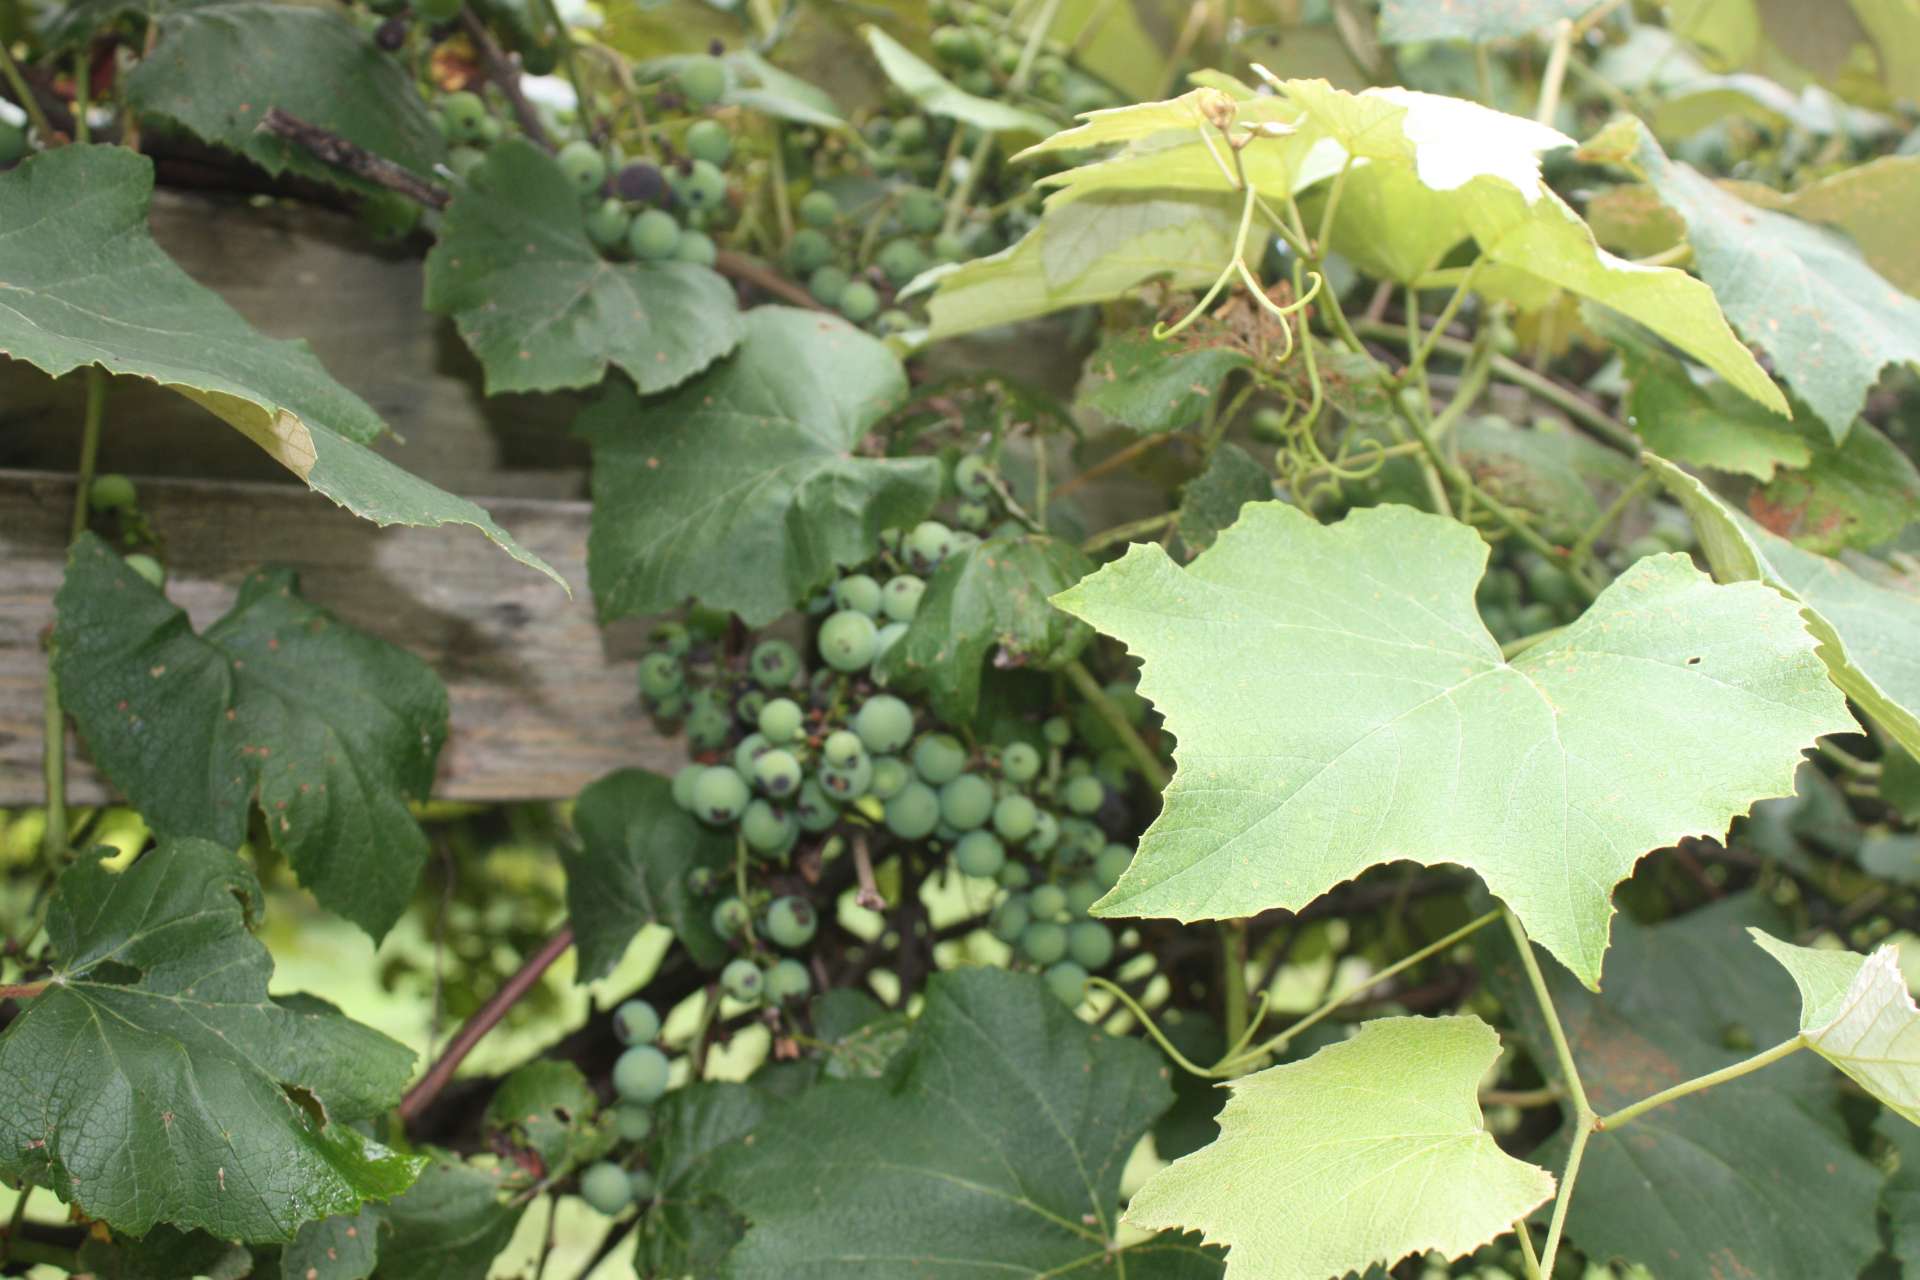 Plus, a great bounty of grapes from your Concord grapevine.